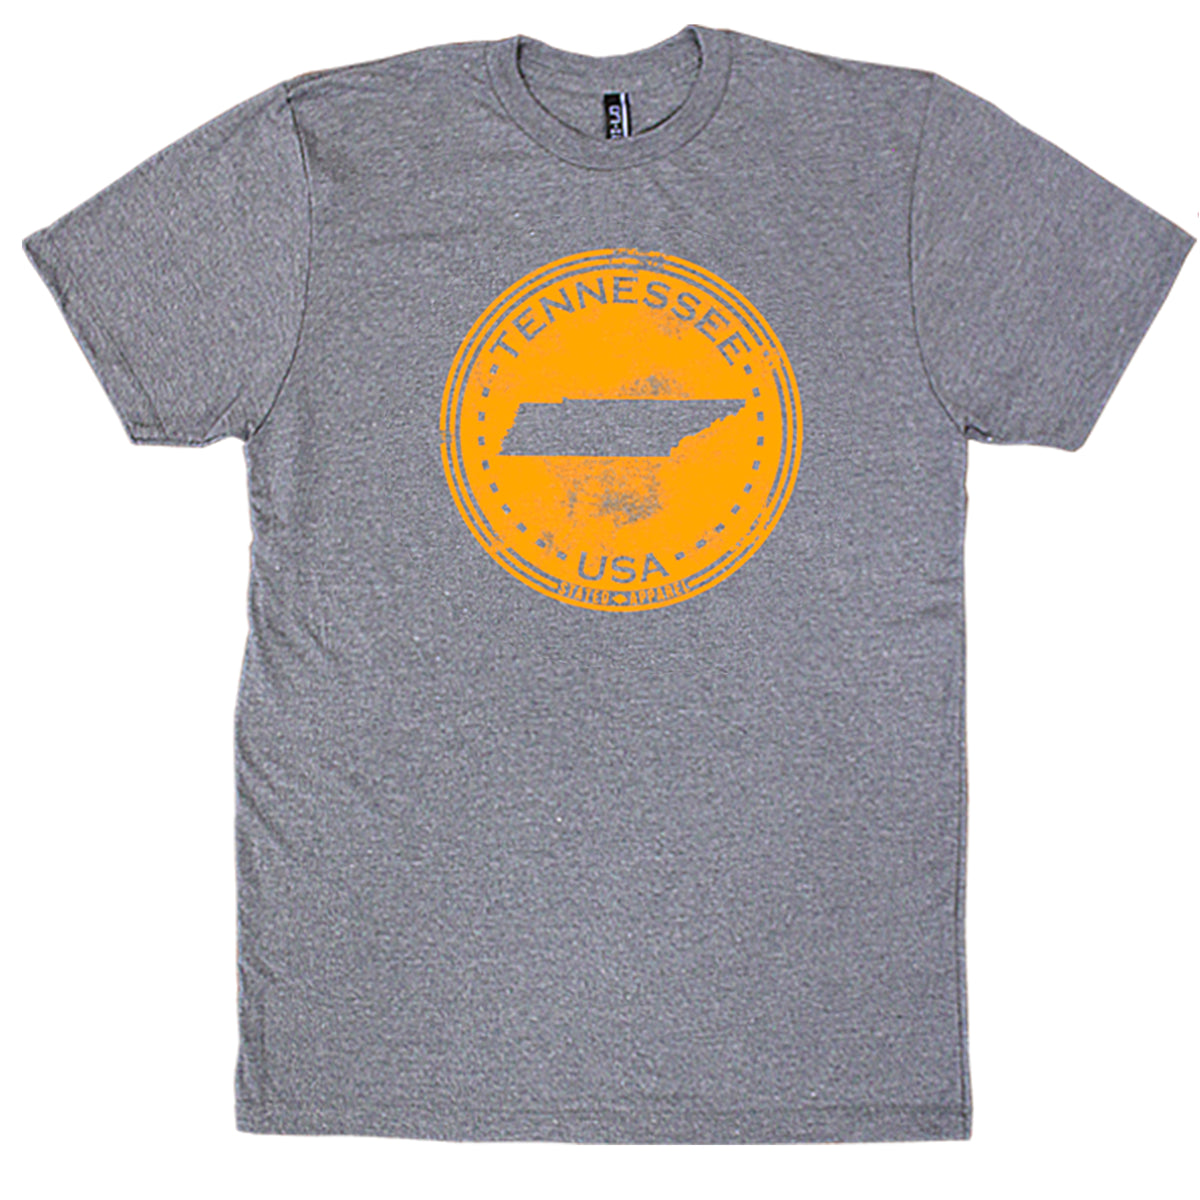 Tennessee Distressed Seal T-Shirt